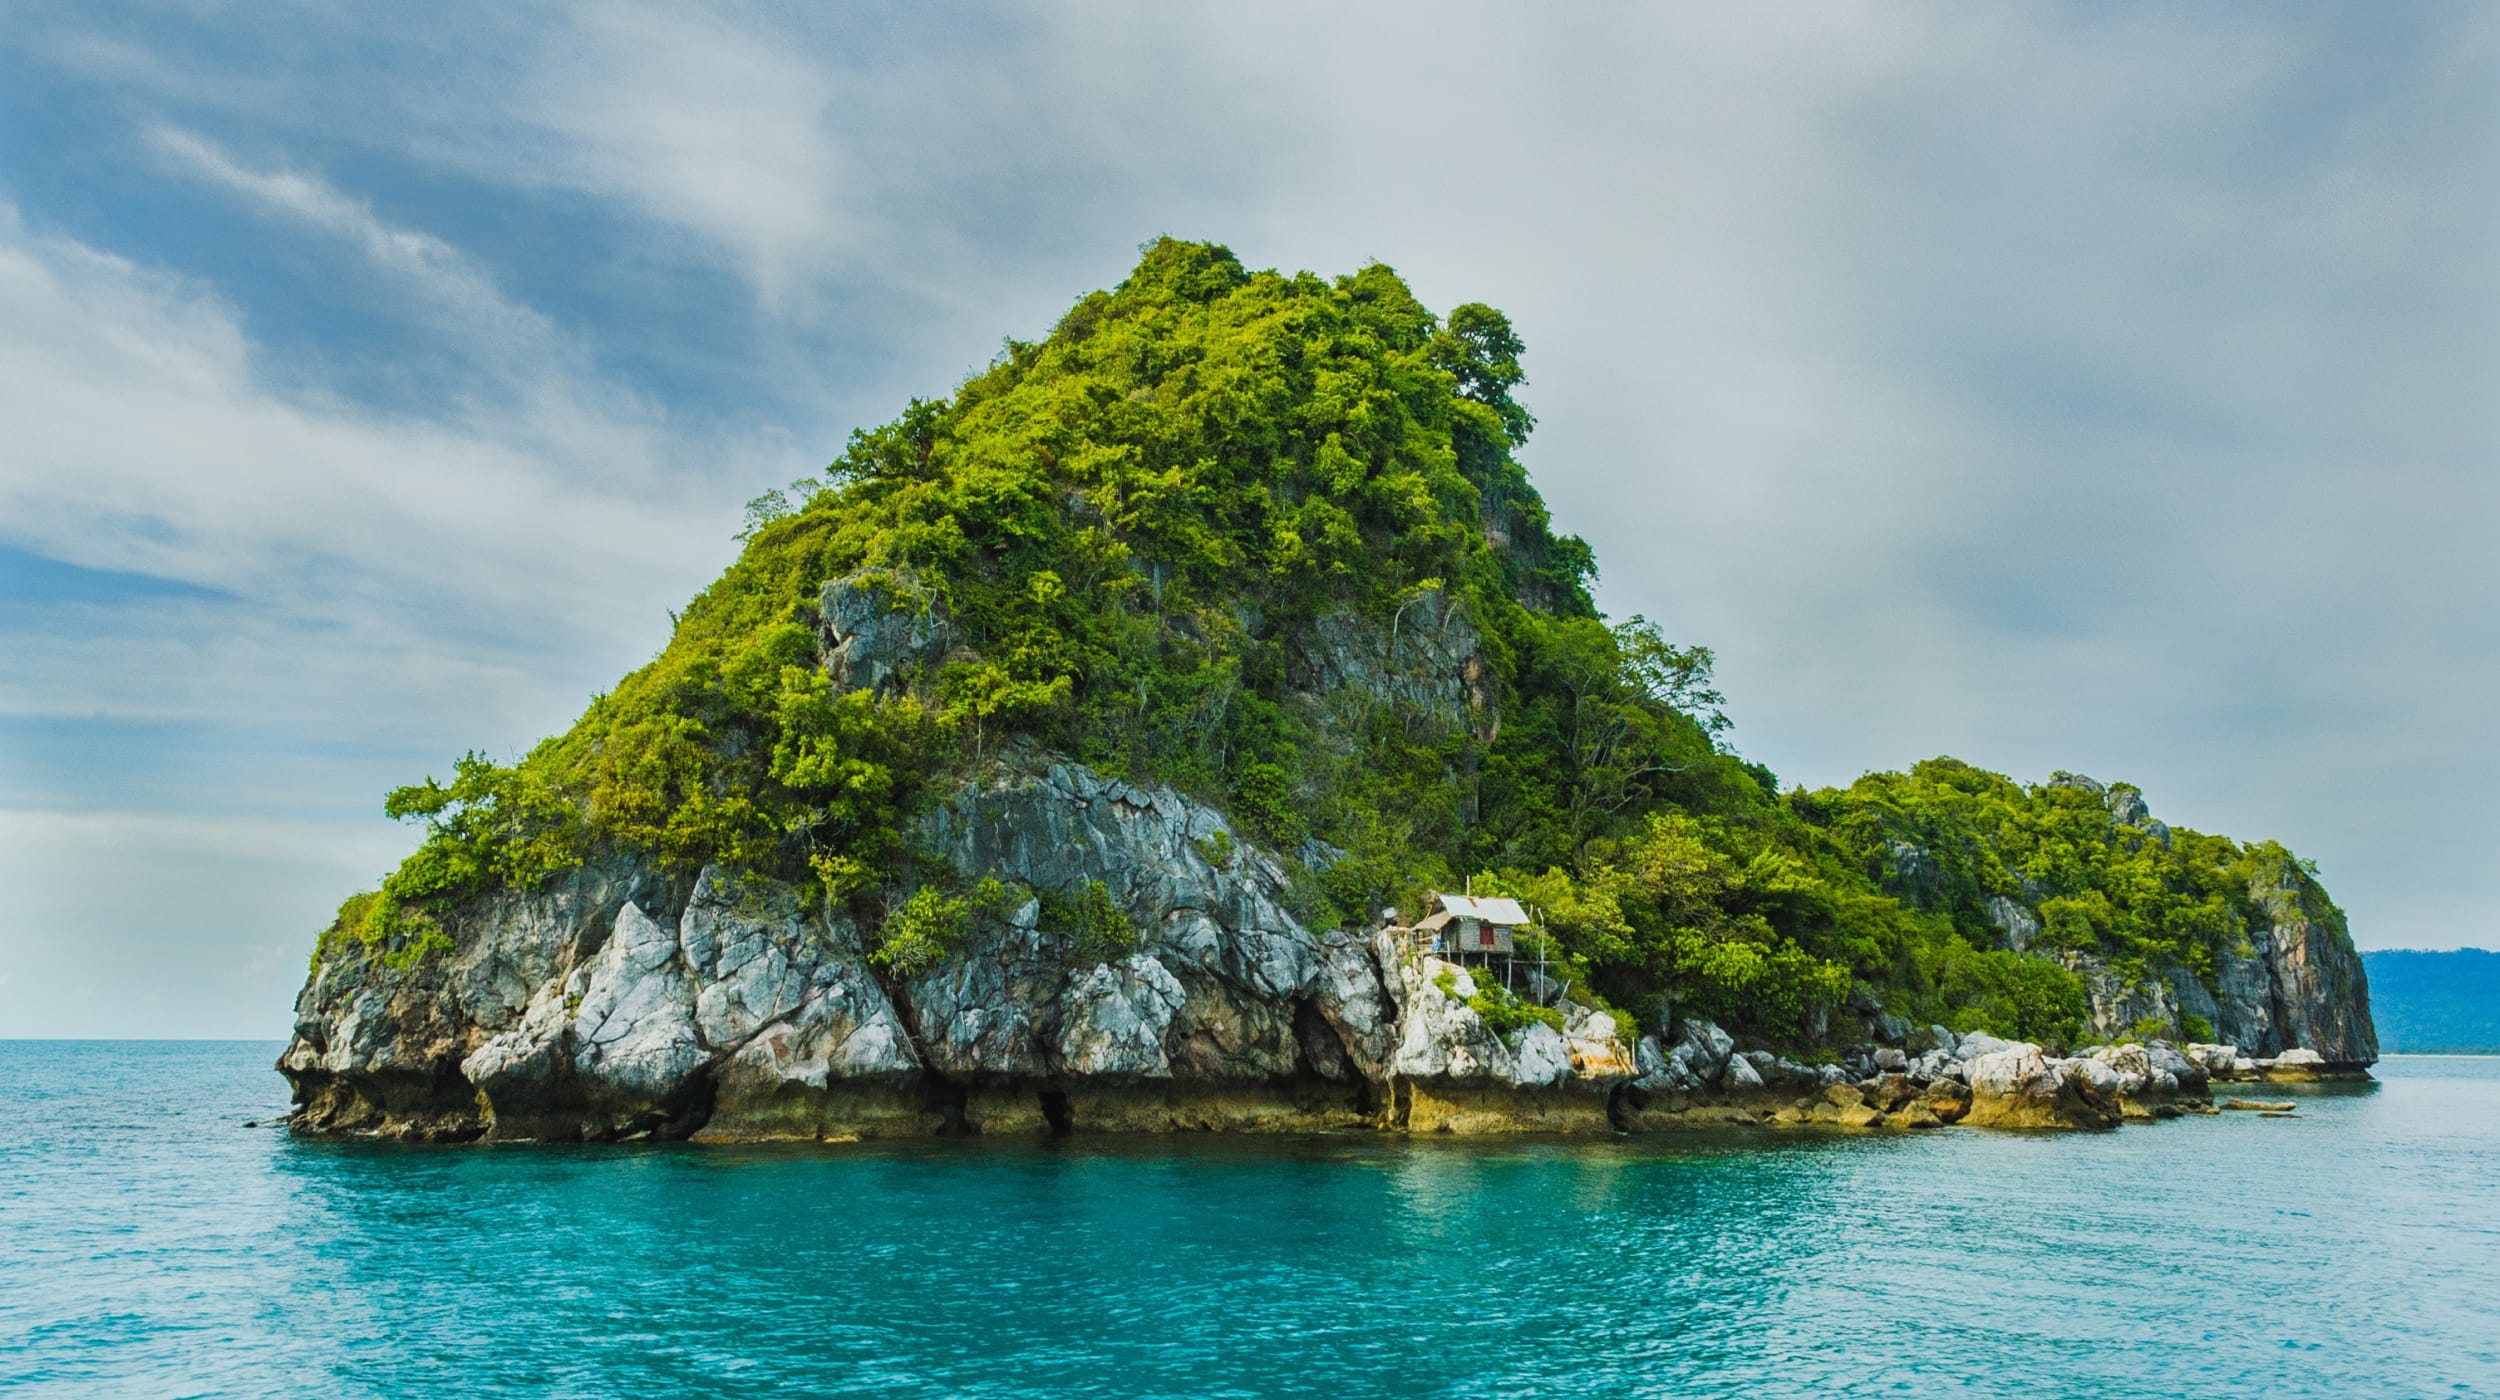 A very small island in a gulf with a small dwelling on the rocks